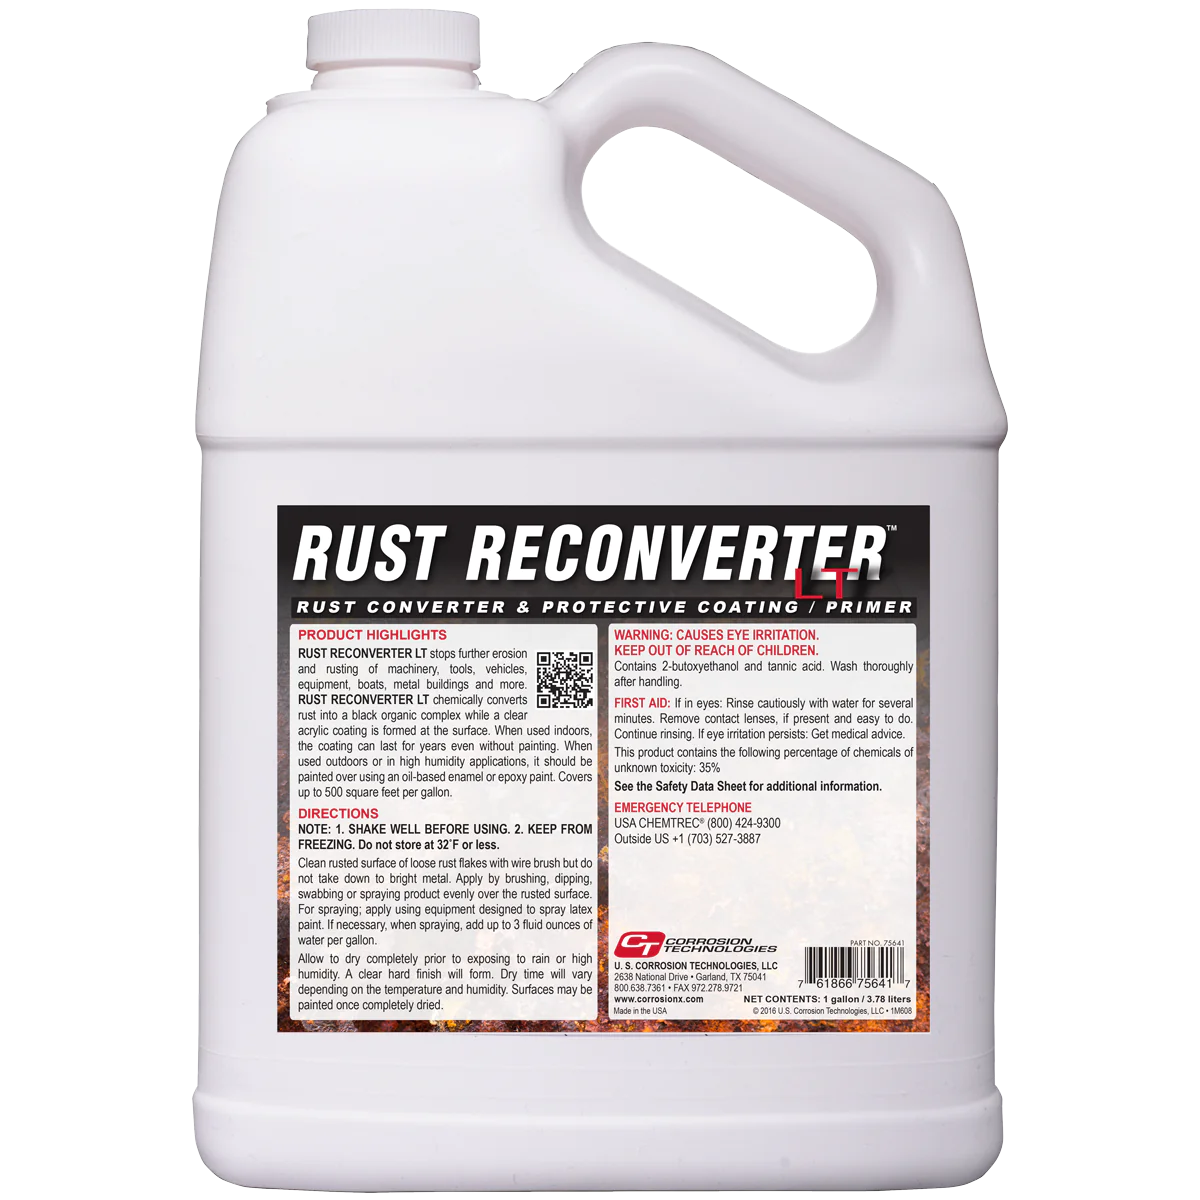 Rust Removal & Conversion